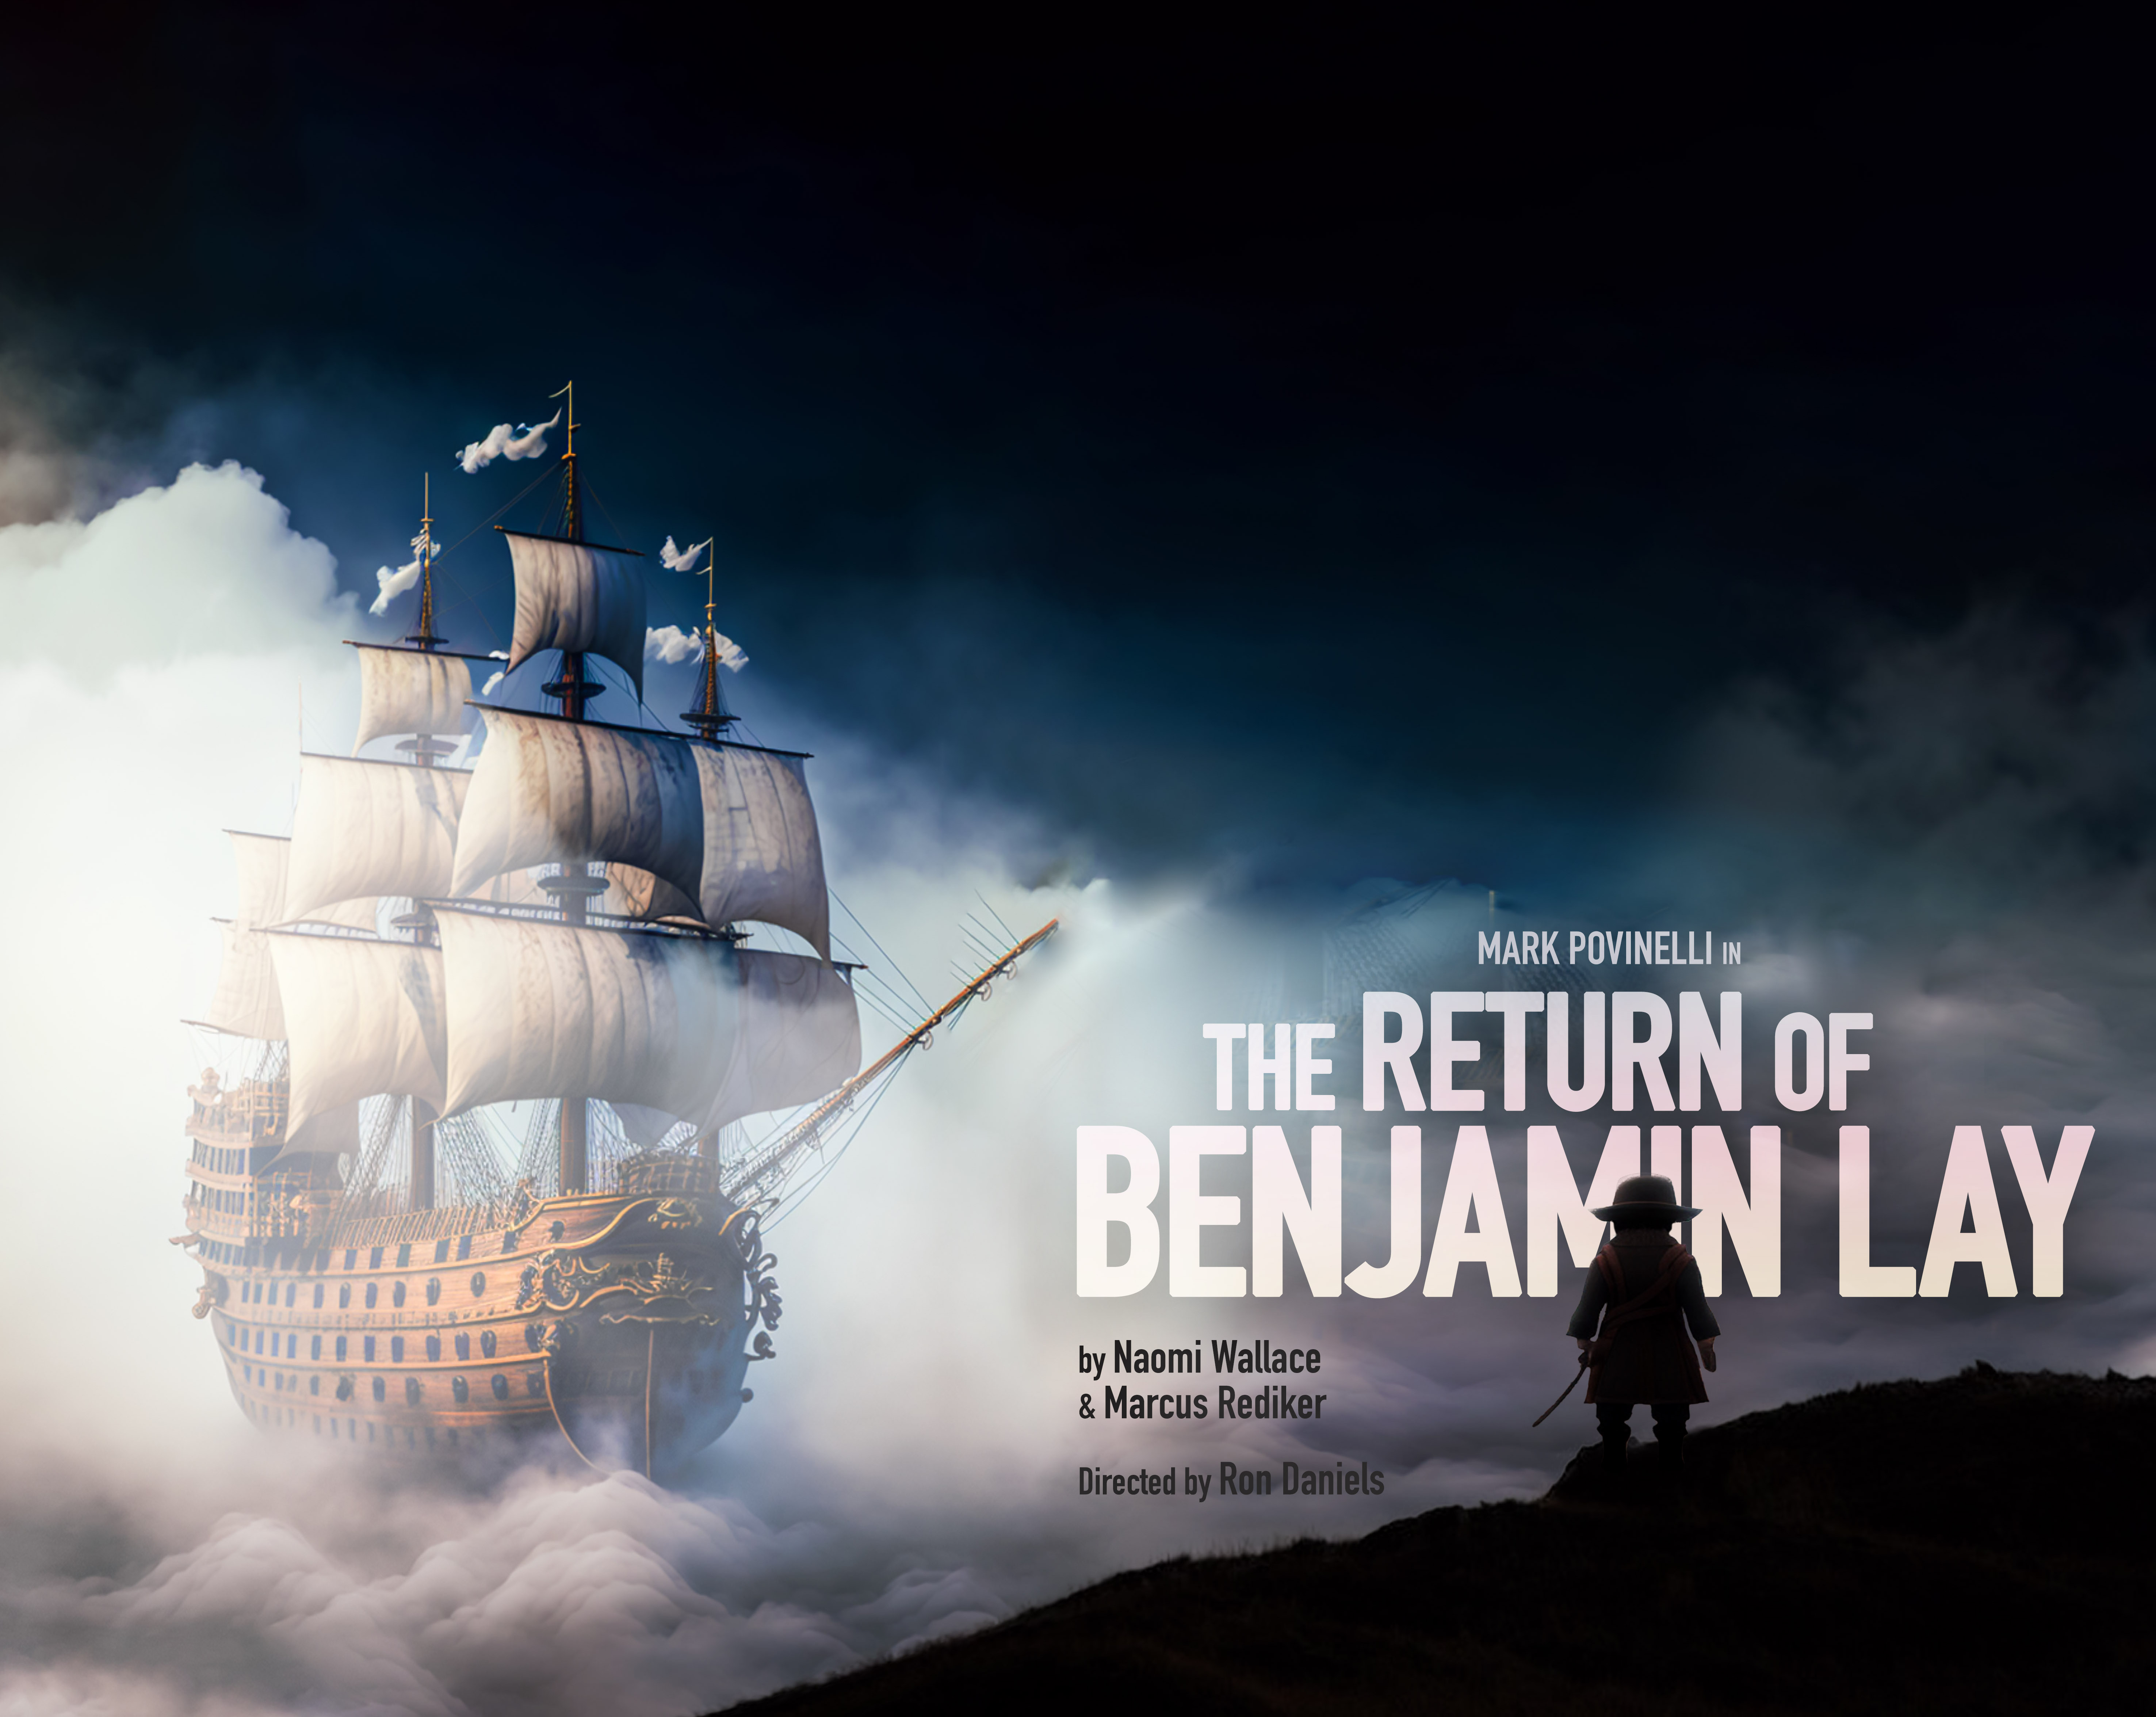 "The Return of Benjamin Lay," a play by Marcus Rediker, promotional graphic